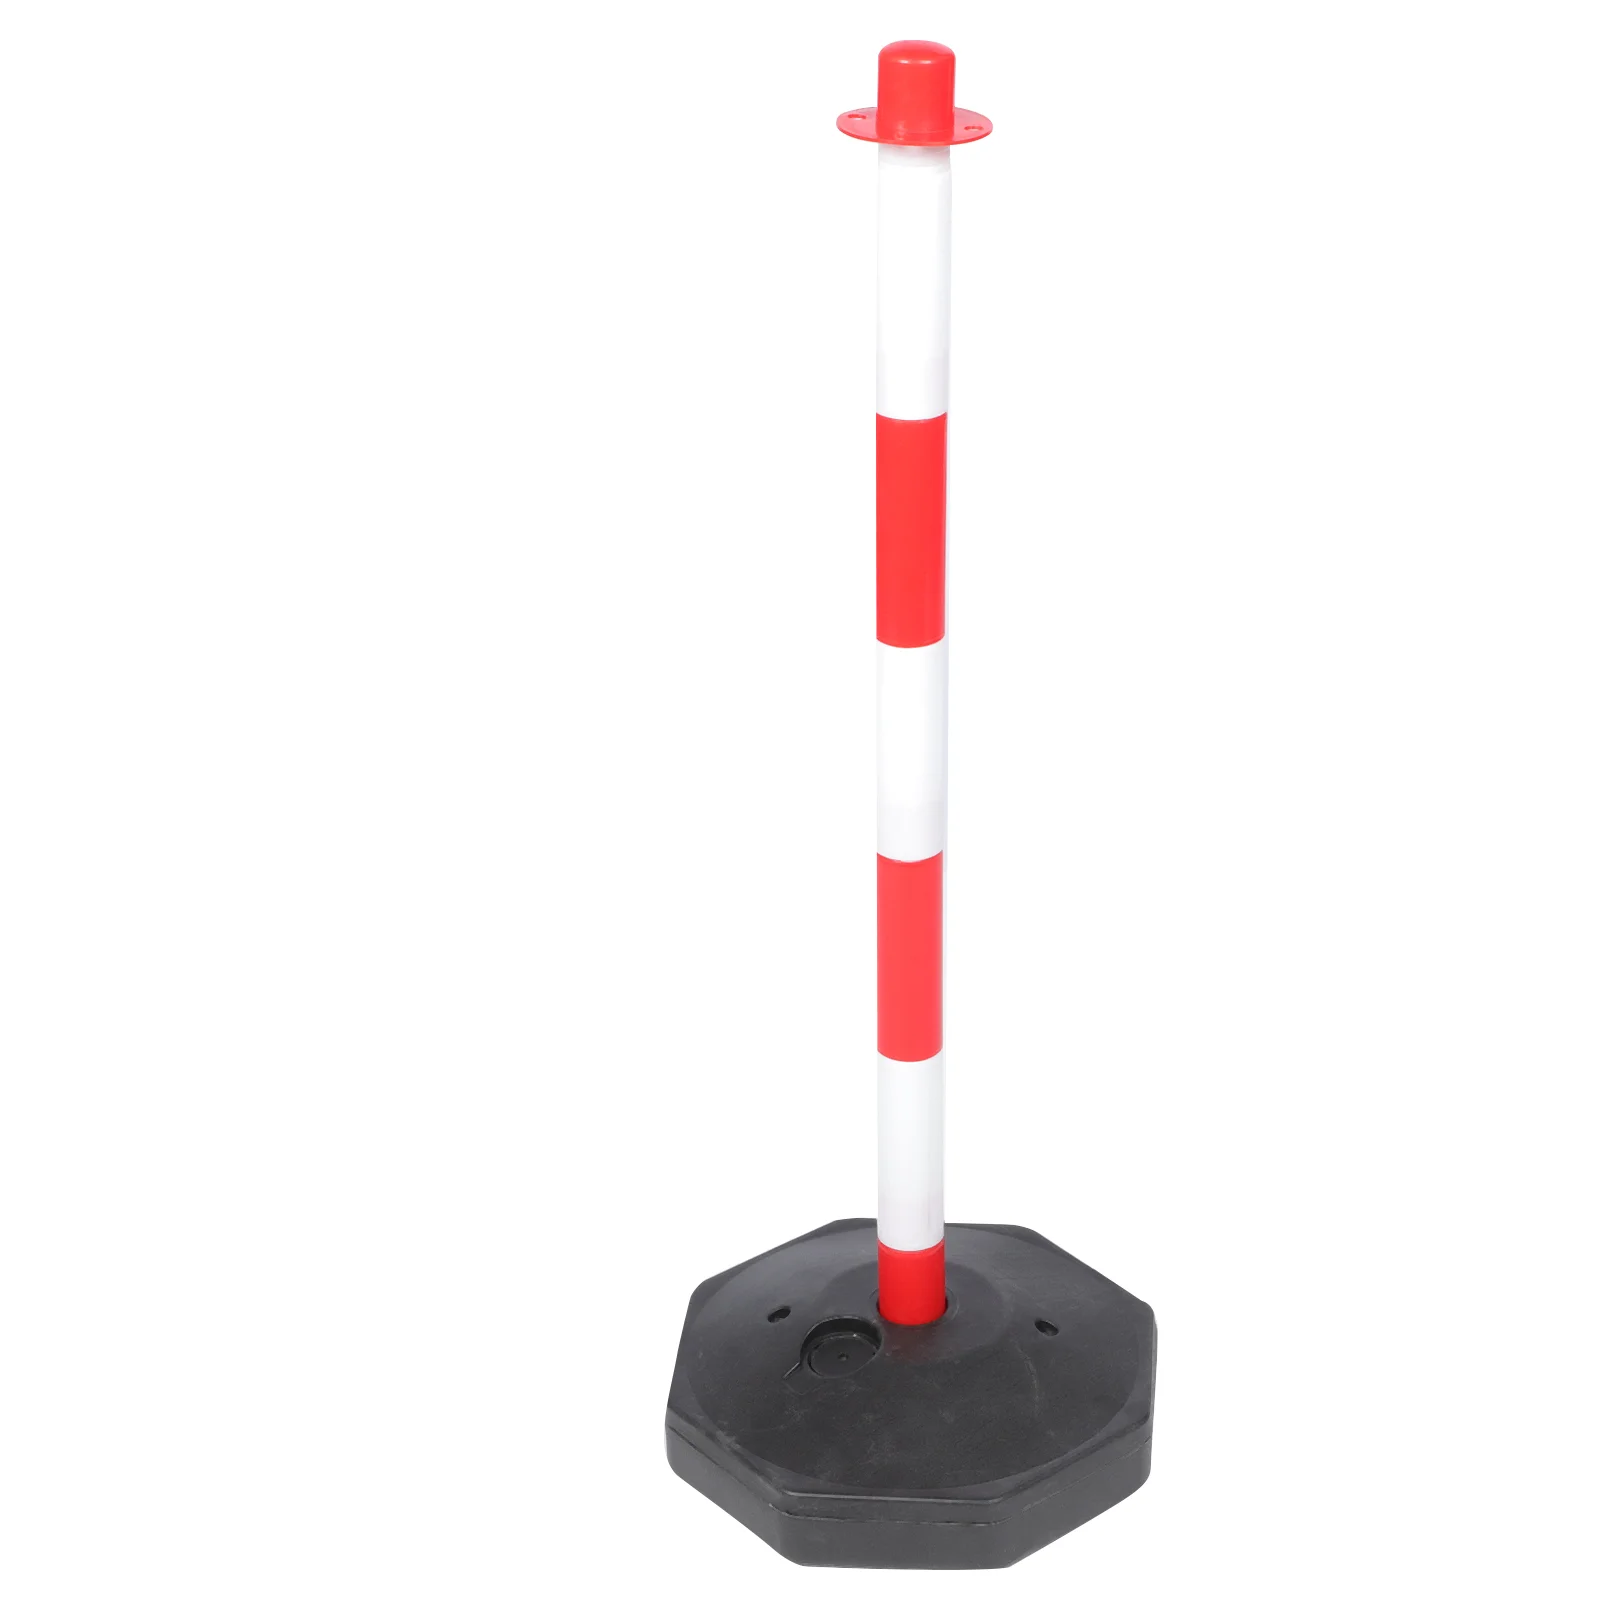 

Traffic Safety Post Parking Bollard Cones Barrier Delineator Warning Road Cone Stanchion Poles Column Pole Sign Barricade Base